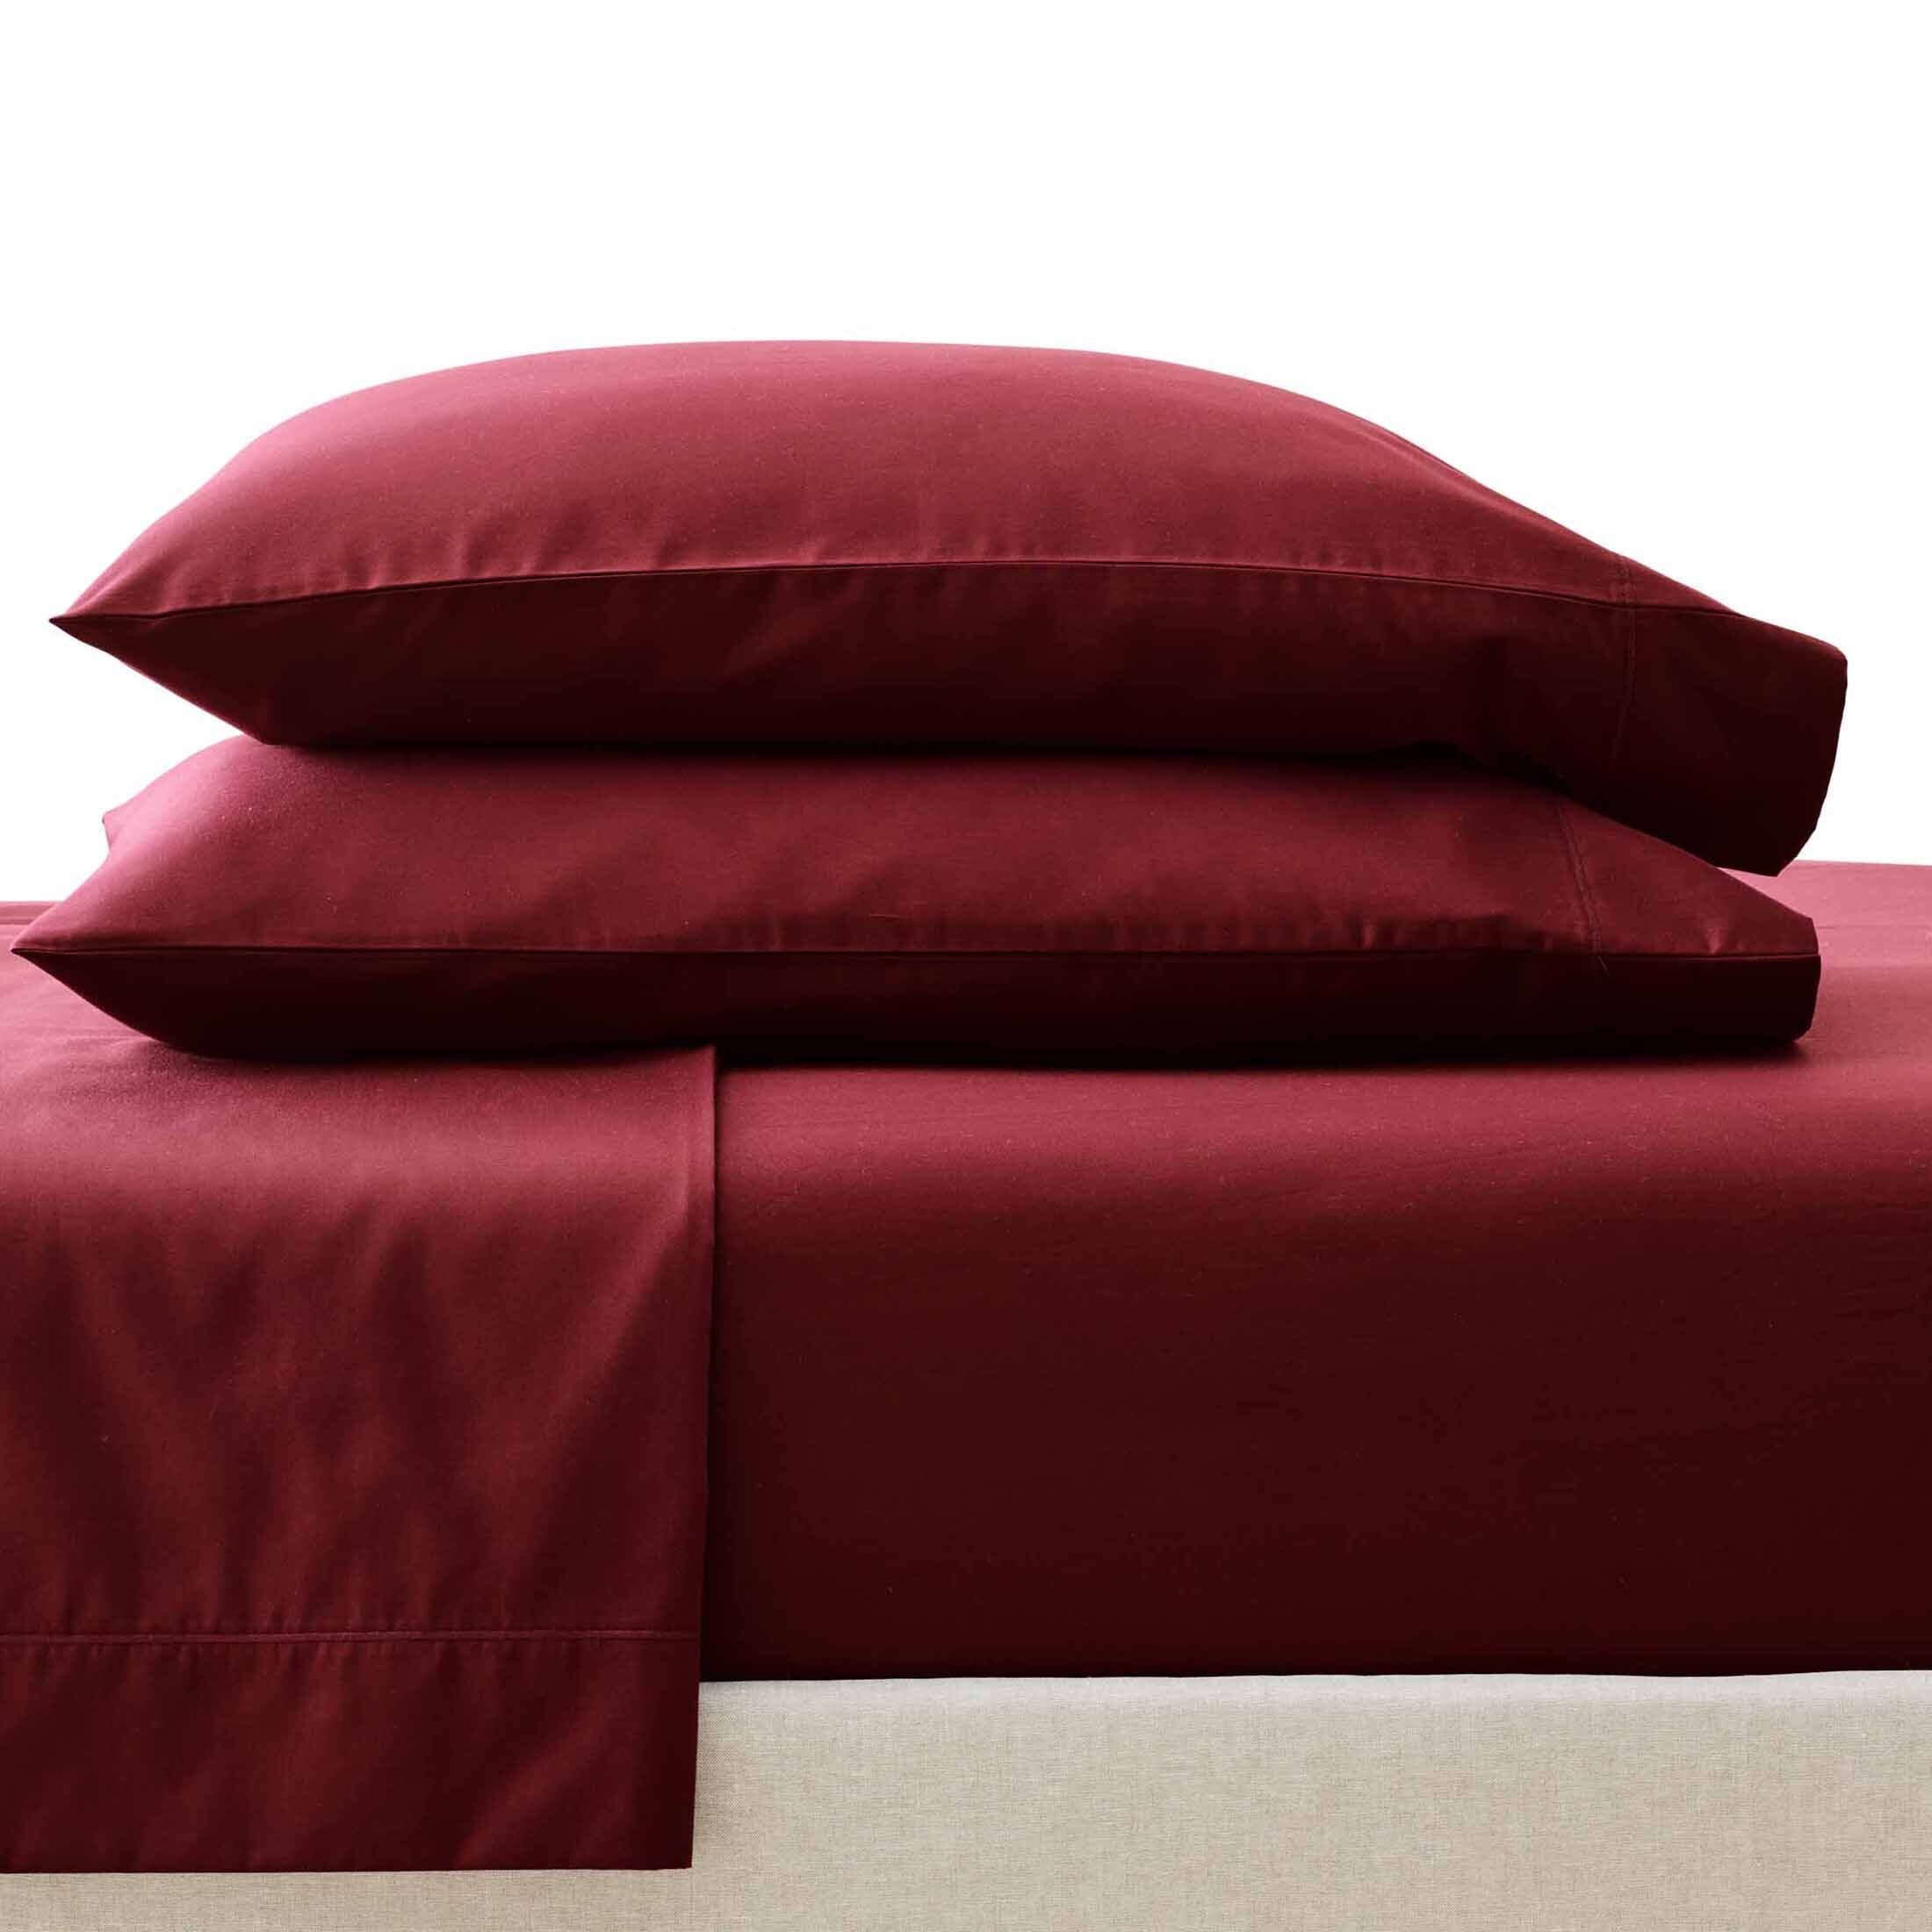 Better Homes & Gardens 3-Piece 400 Thread Count Deep Redwood Performance Hygro Cotton Sheet Set, Twin - image 1 of 6